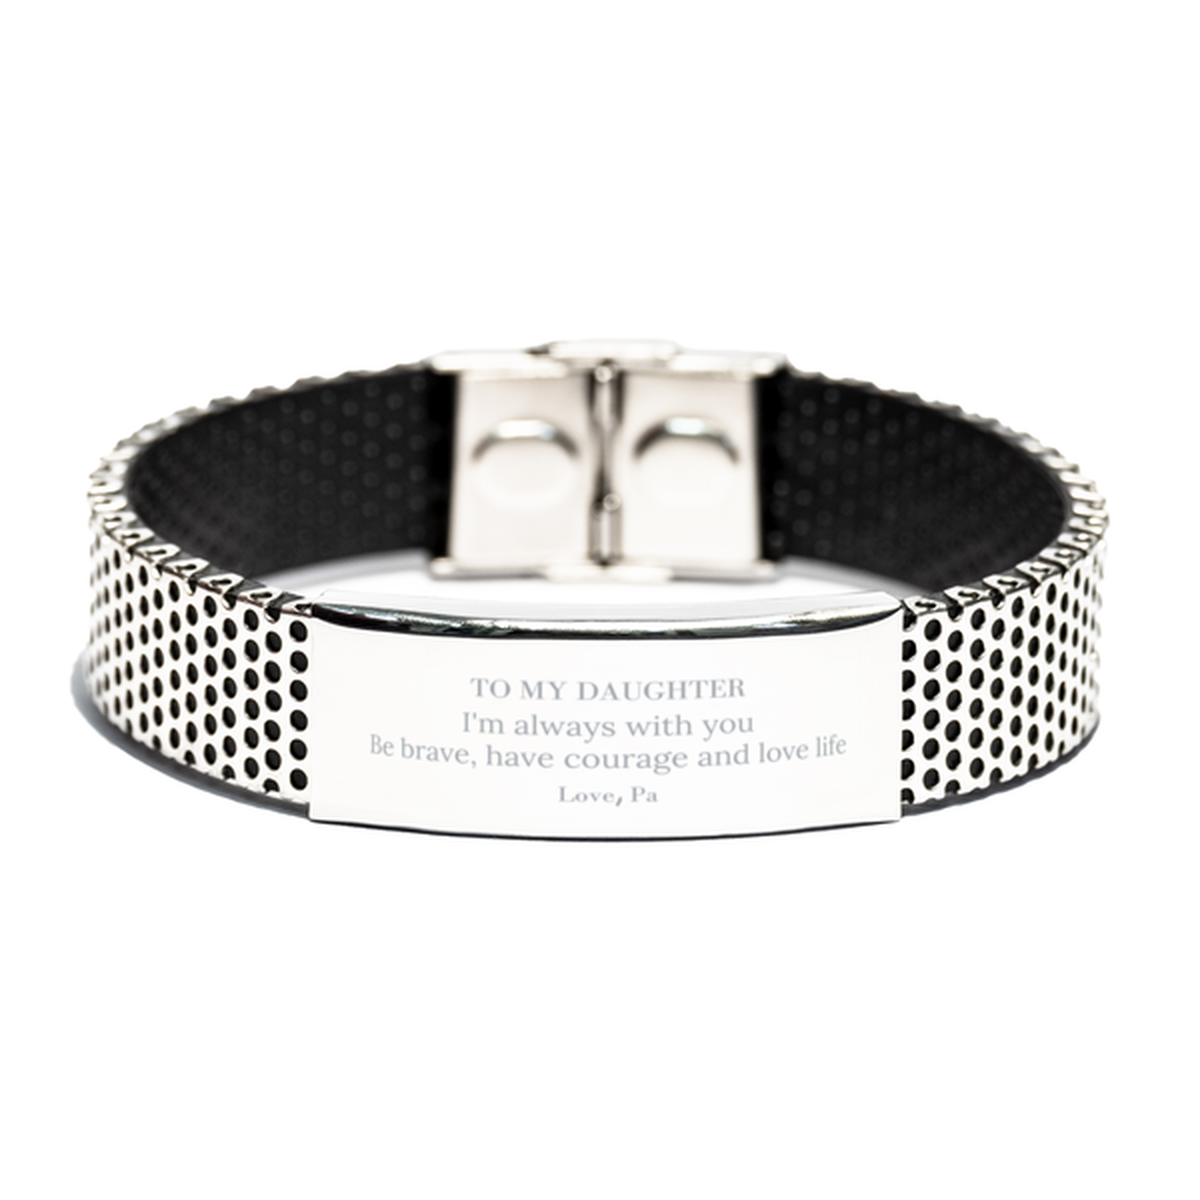 To My Daughter Gifts from Pa, Unique Stainless Steel Bracelet Inspirational Christmas Birthday Graduation Gifts for Daughter I'm always with you. Be brave, have courage and love life. Love, Pa